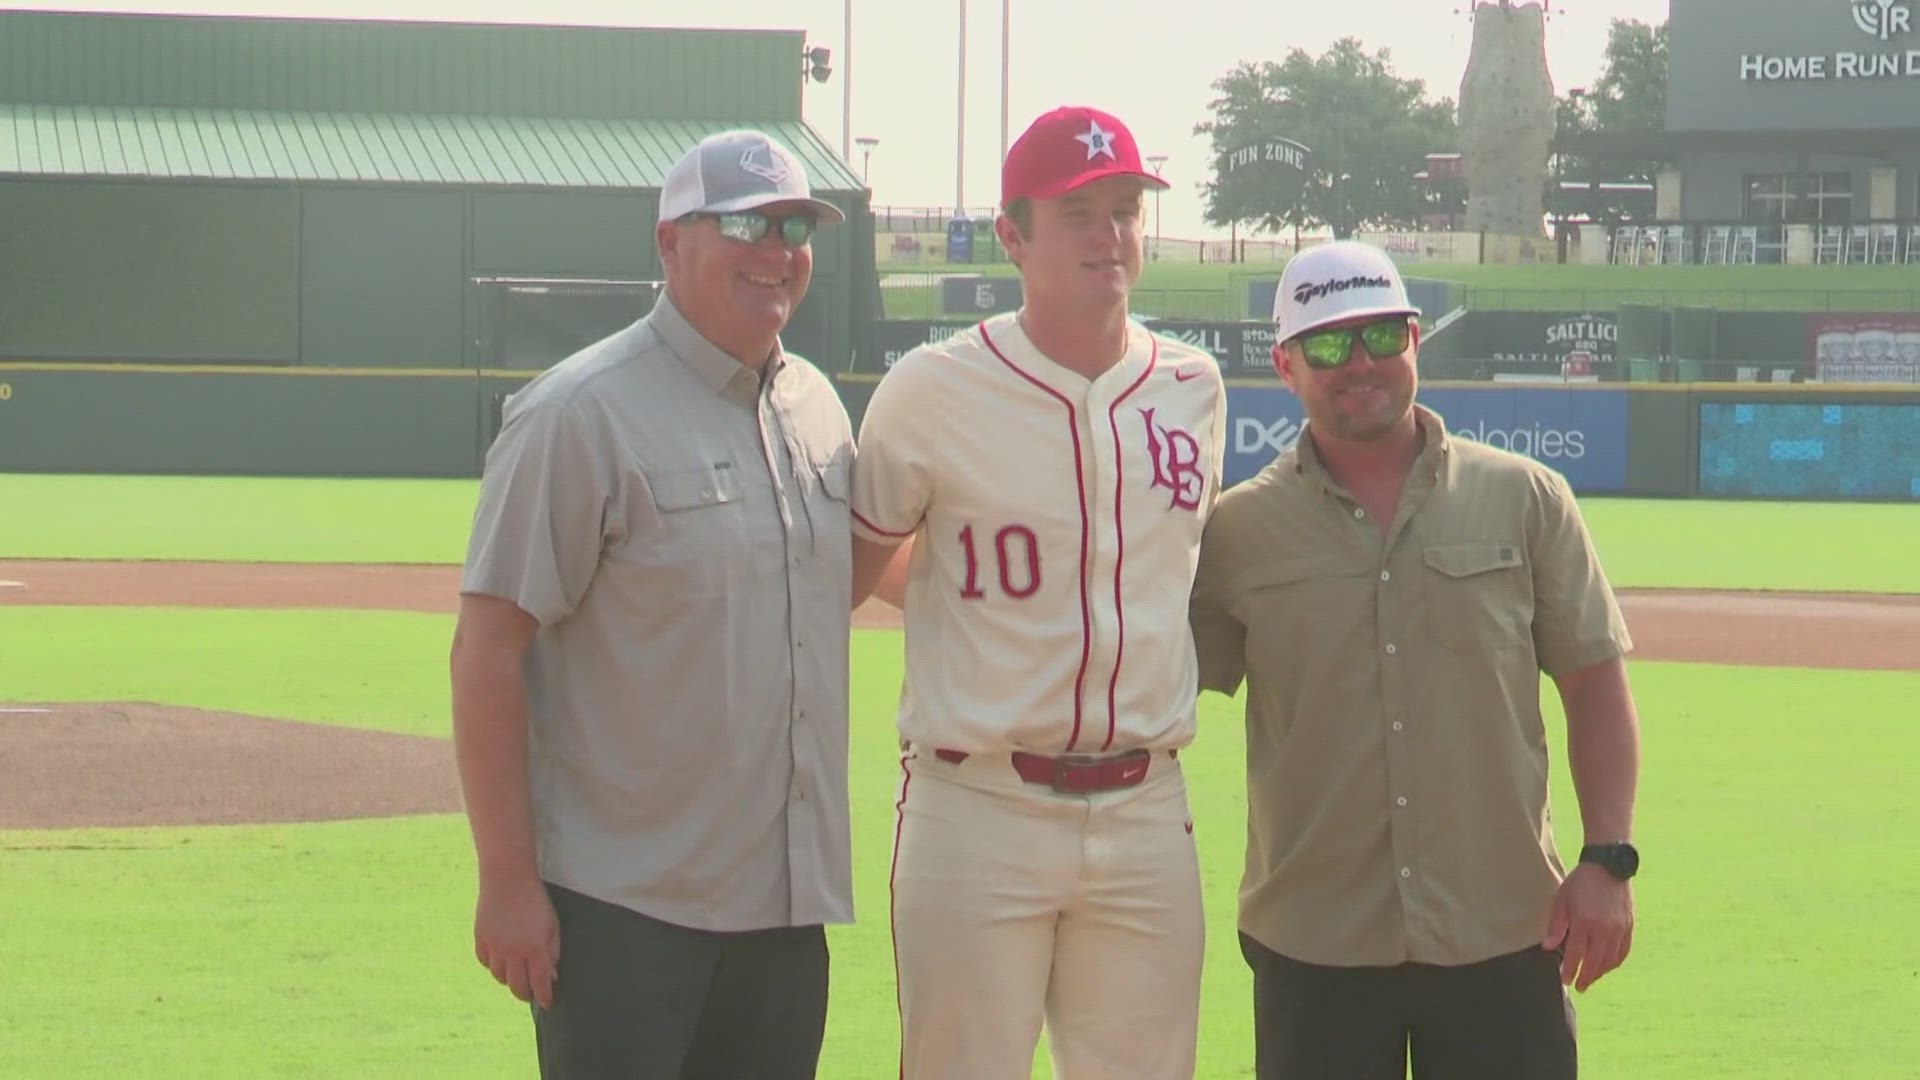 Two more Central Texas studs made their way to Dell Diamond for a 5A, 6A battle, with their fathers watching them wear their high school colors for the last time.